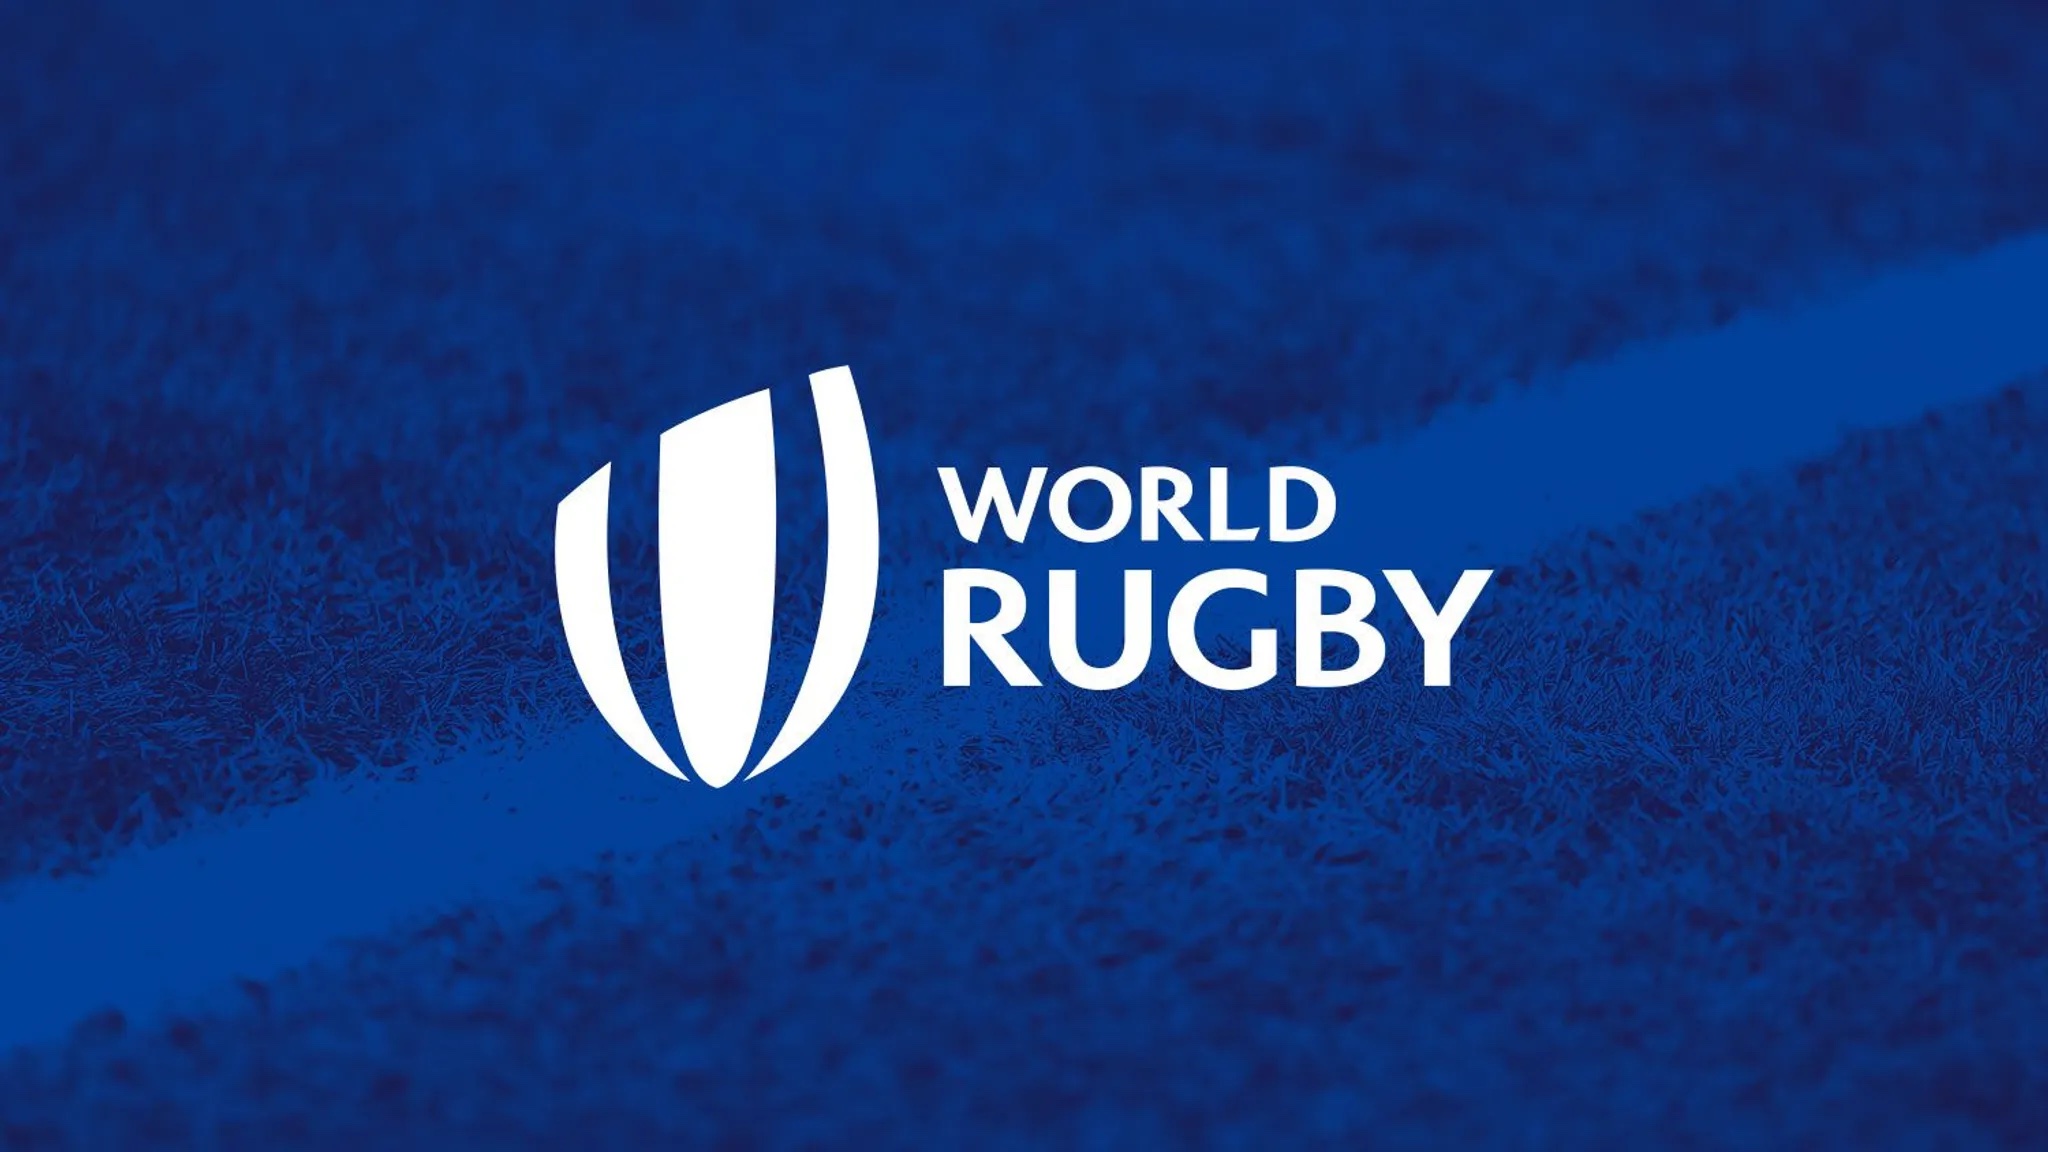 RugbyPass TVs World Cup coverage draws 3.3m views, with 350k new subscribers